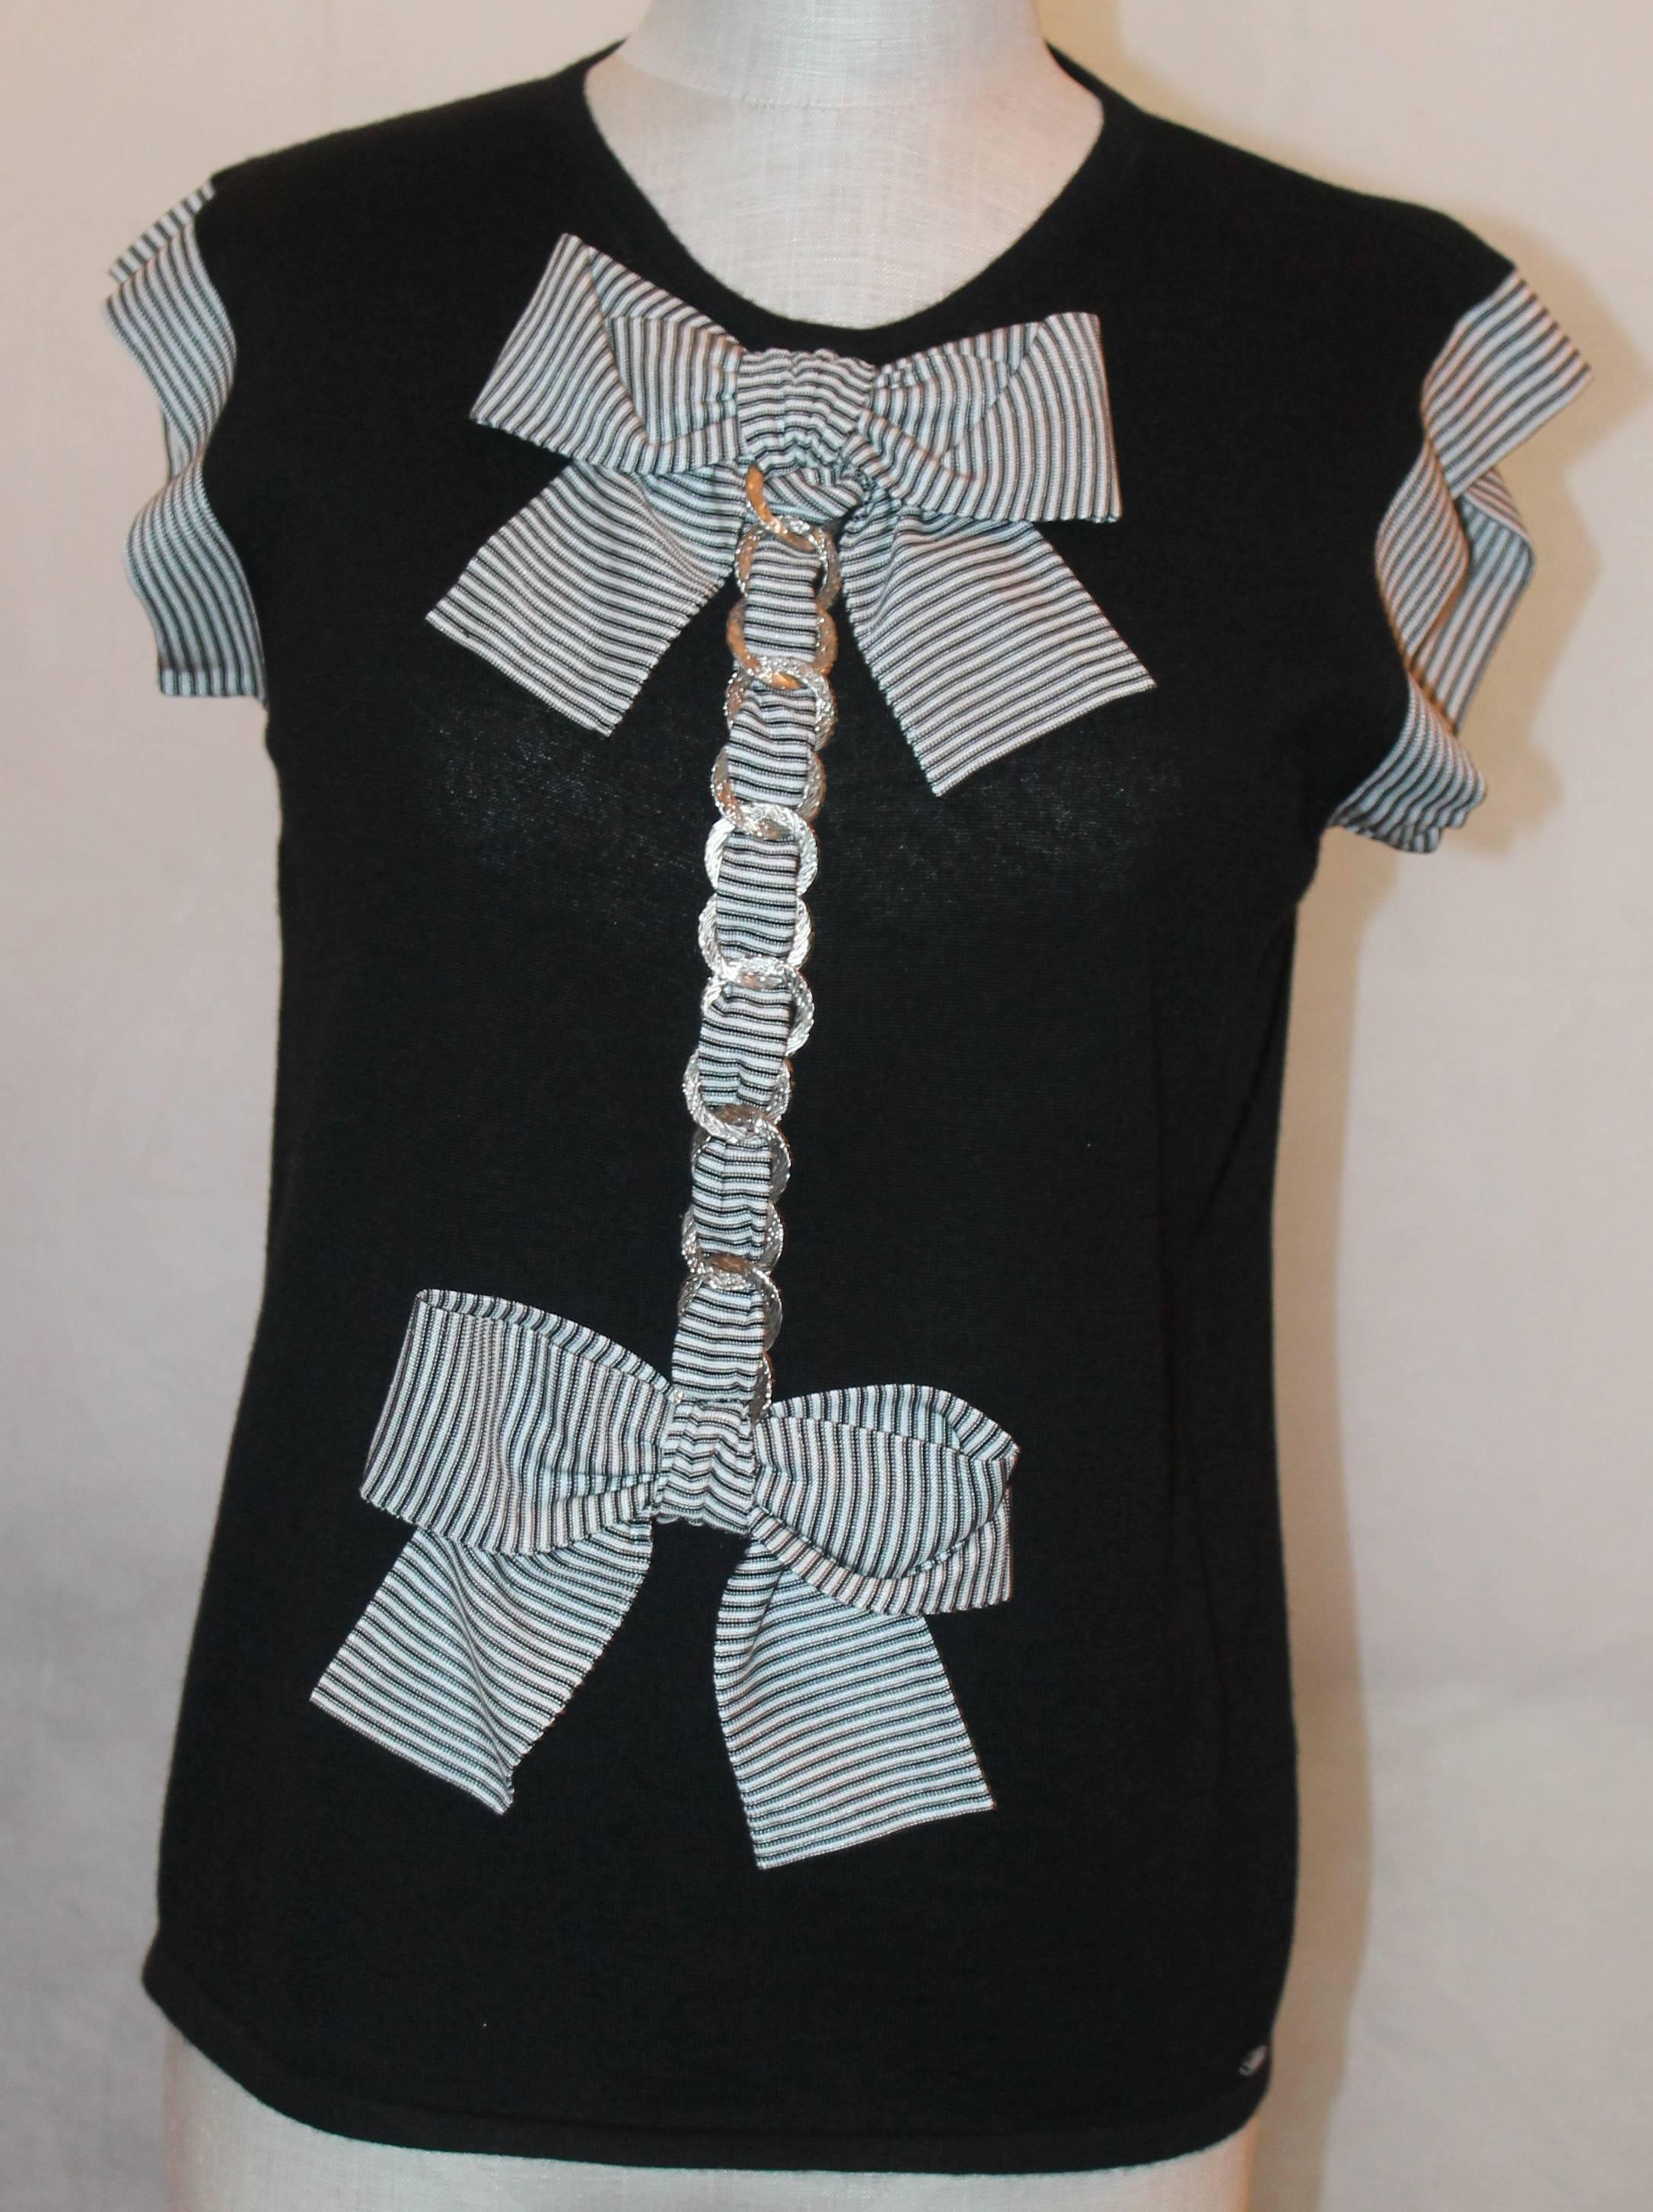 Chanel Black Cashmere & Silk Top w/ Bow & Chain Detail - 07P- Sz 40.  Top w/ black and white striped trim on shoulders and on bows down the center.  Its front detail is intertwined with a silver chain link.  It has a Chanel emblem on the bottom left